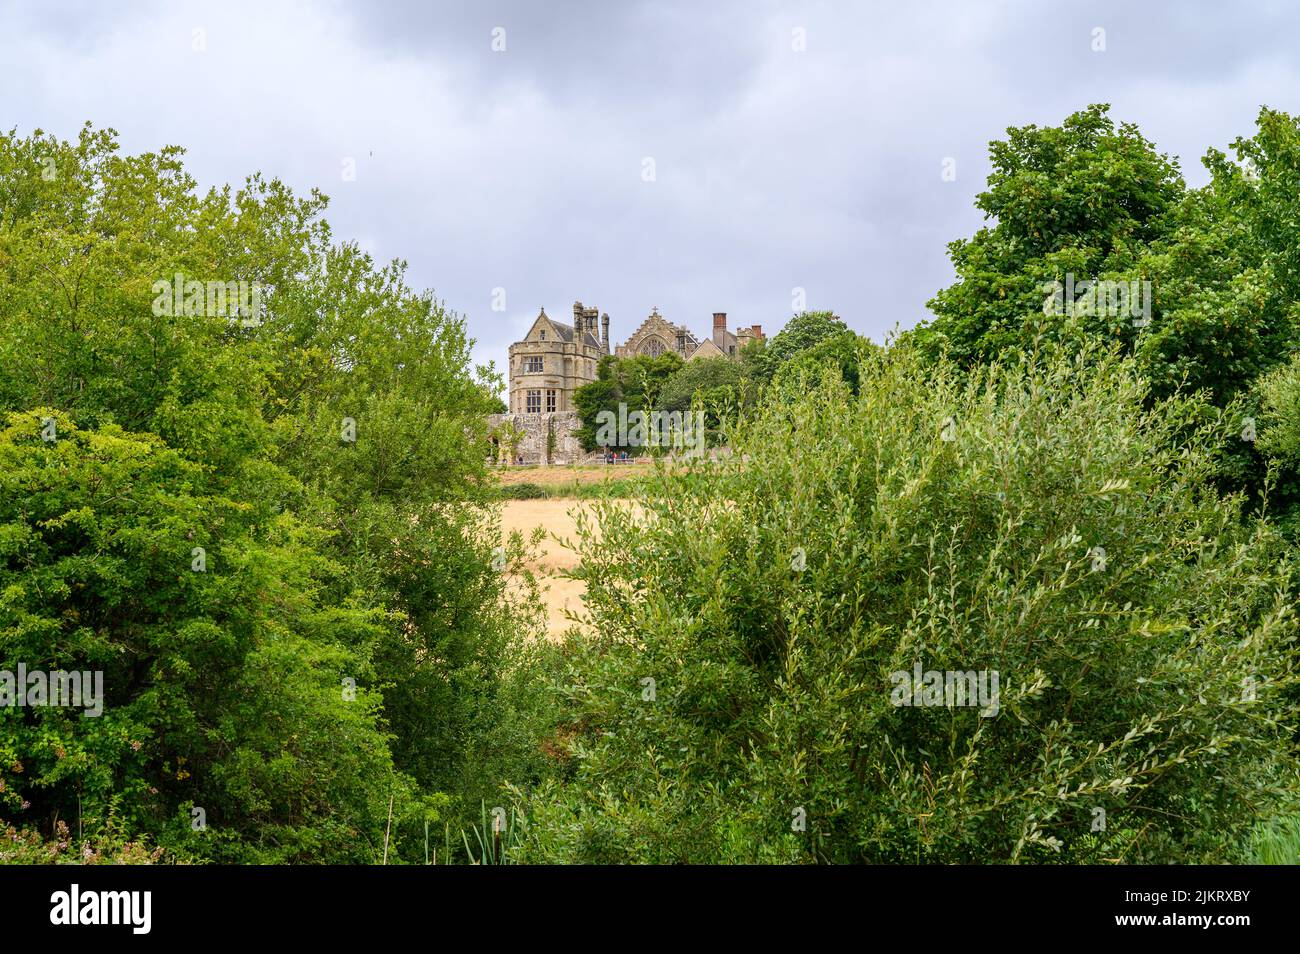 Battle Abbey situated on top of the battlefield of the Battle of Hastings in 1066 with trees and bushes in the foreground, East Sussex, England. Stock Photo